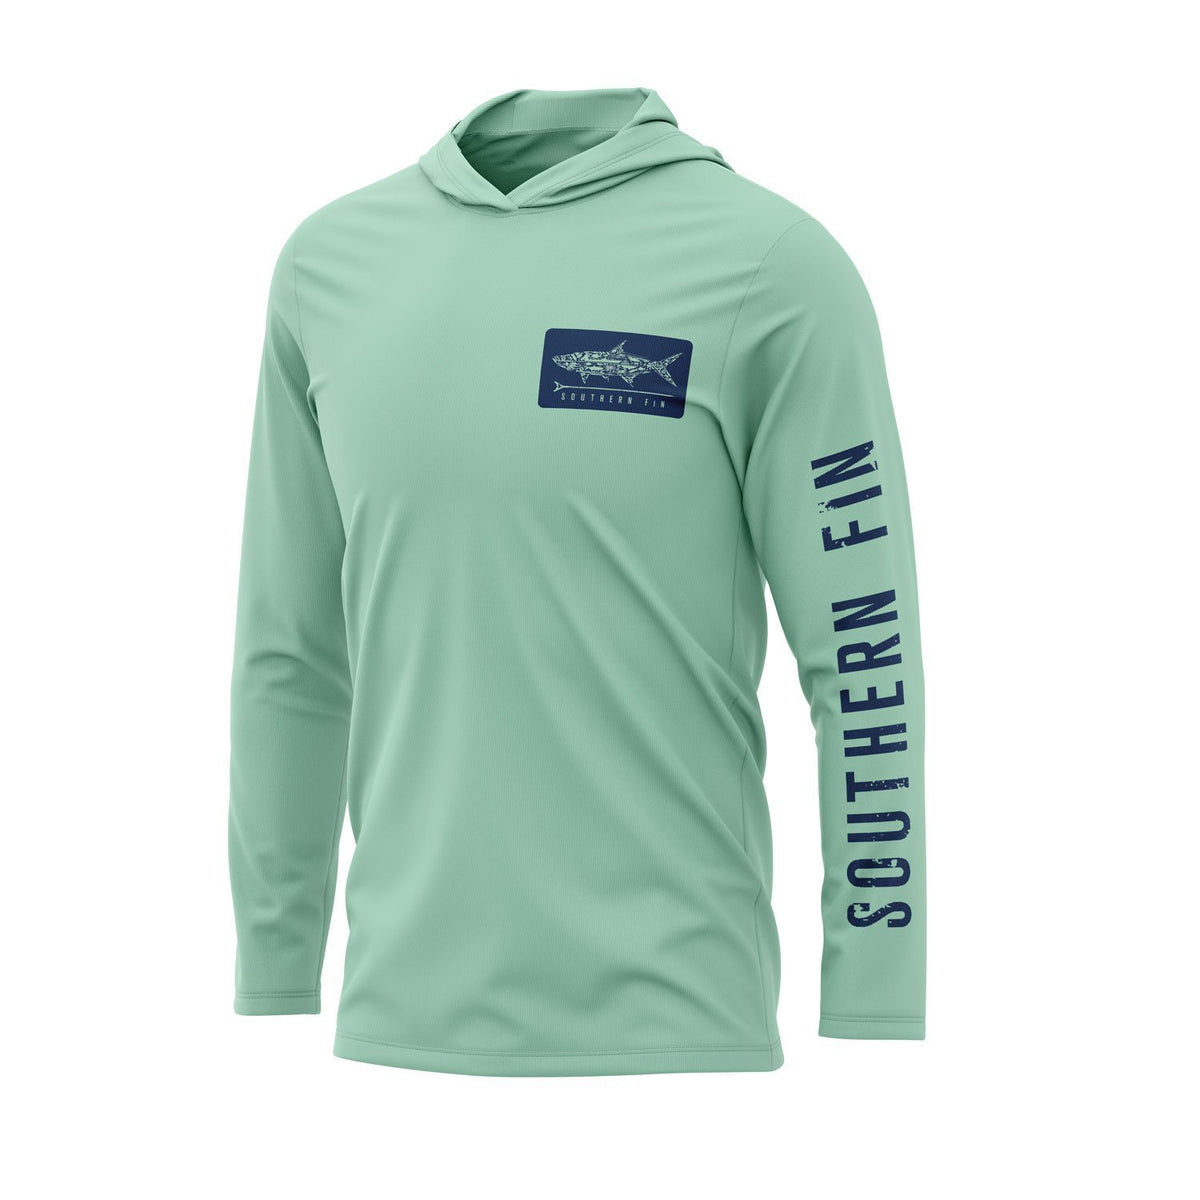 Southern Fin Apparel Mens Long Sleeve Fishing Hoodie Shirt with UV Sun Protection, adult Unisex, Size: Small, Green